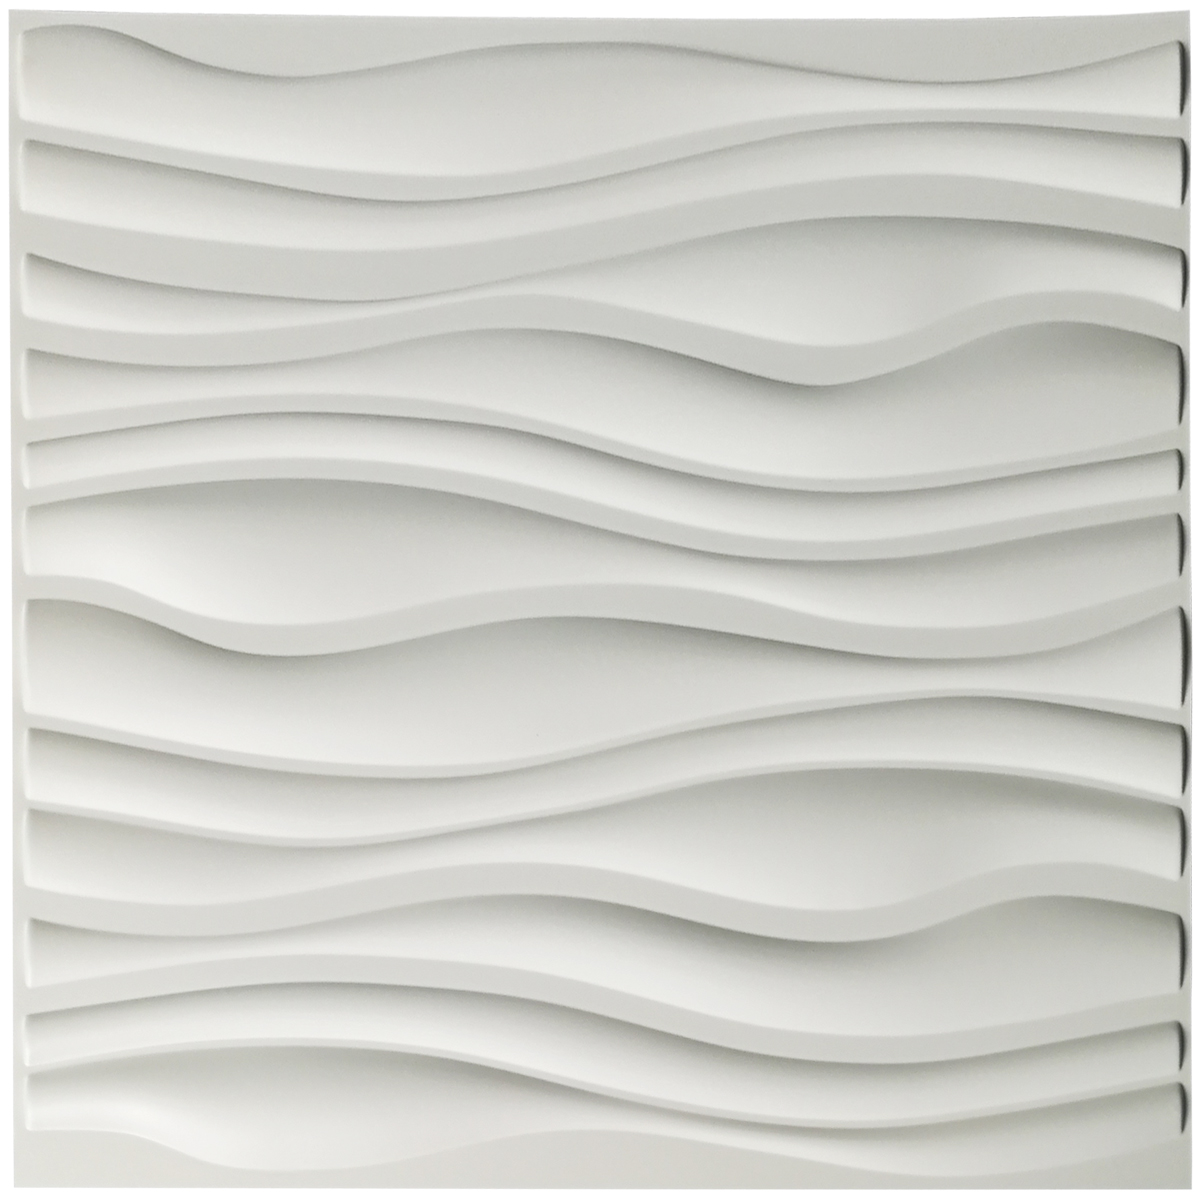 A10037- PVC Wave Board Textured 3D Wall Panels, White Wave, 12 Tiles 32 SF